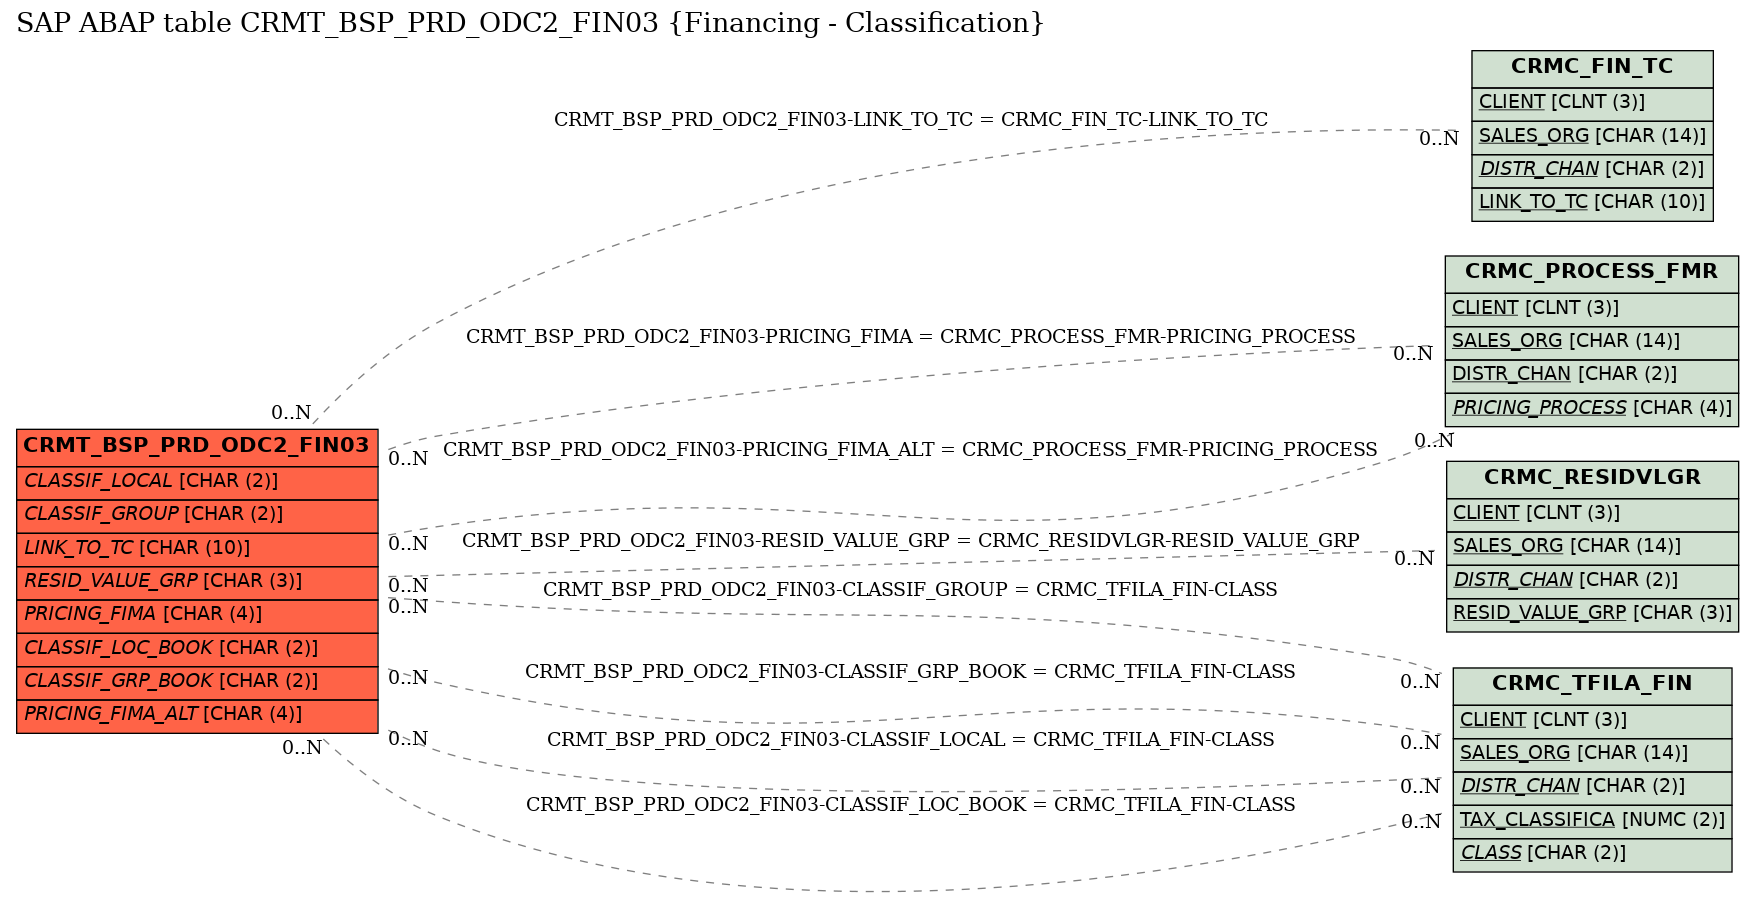 E-R Diagram for table CRMT_BSP_PRD_ODC2_FIN03 (Financing - Classification)